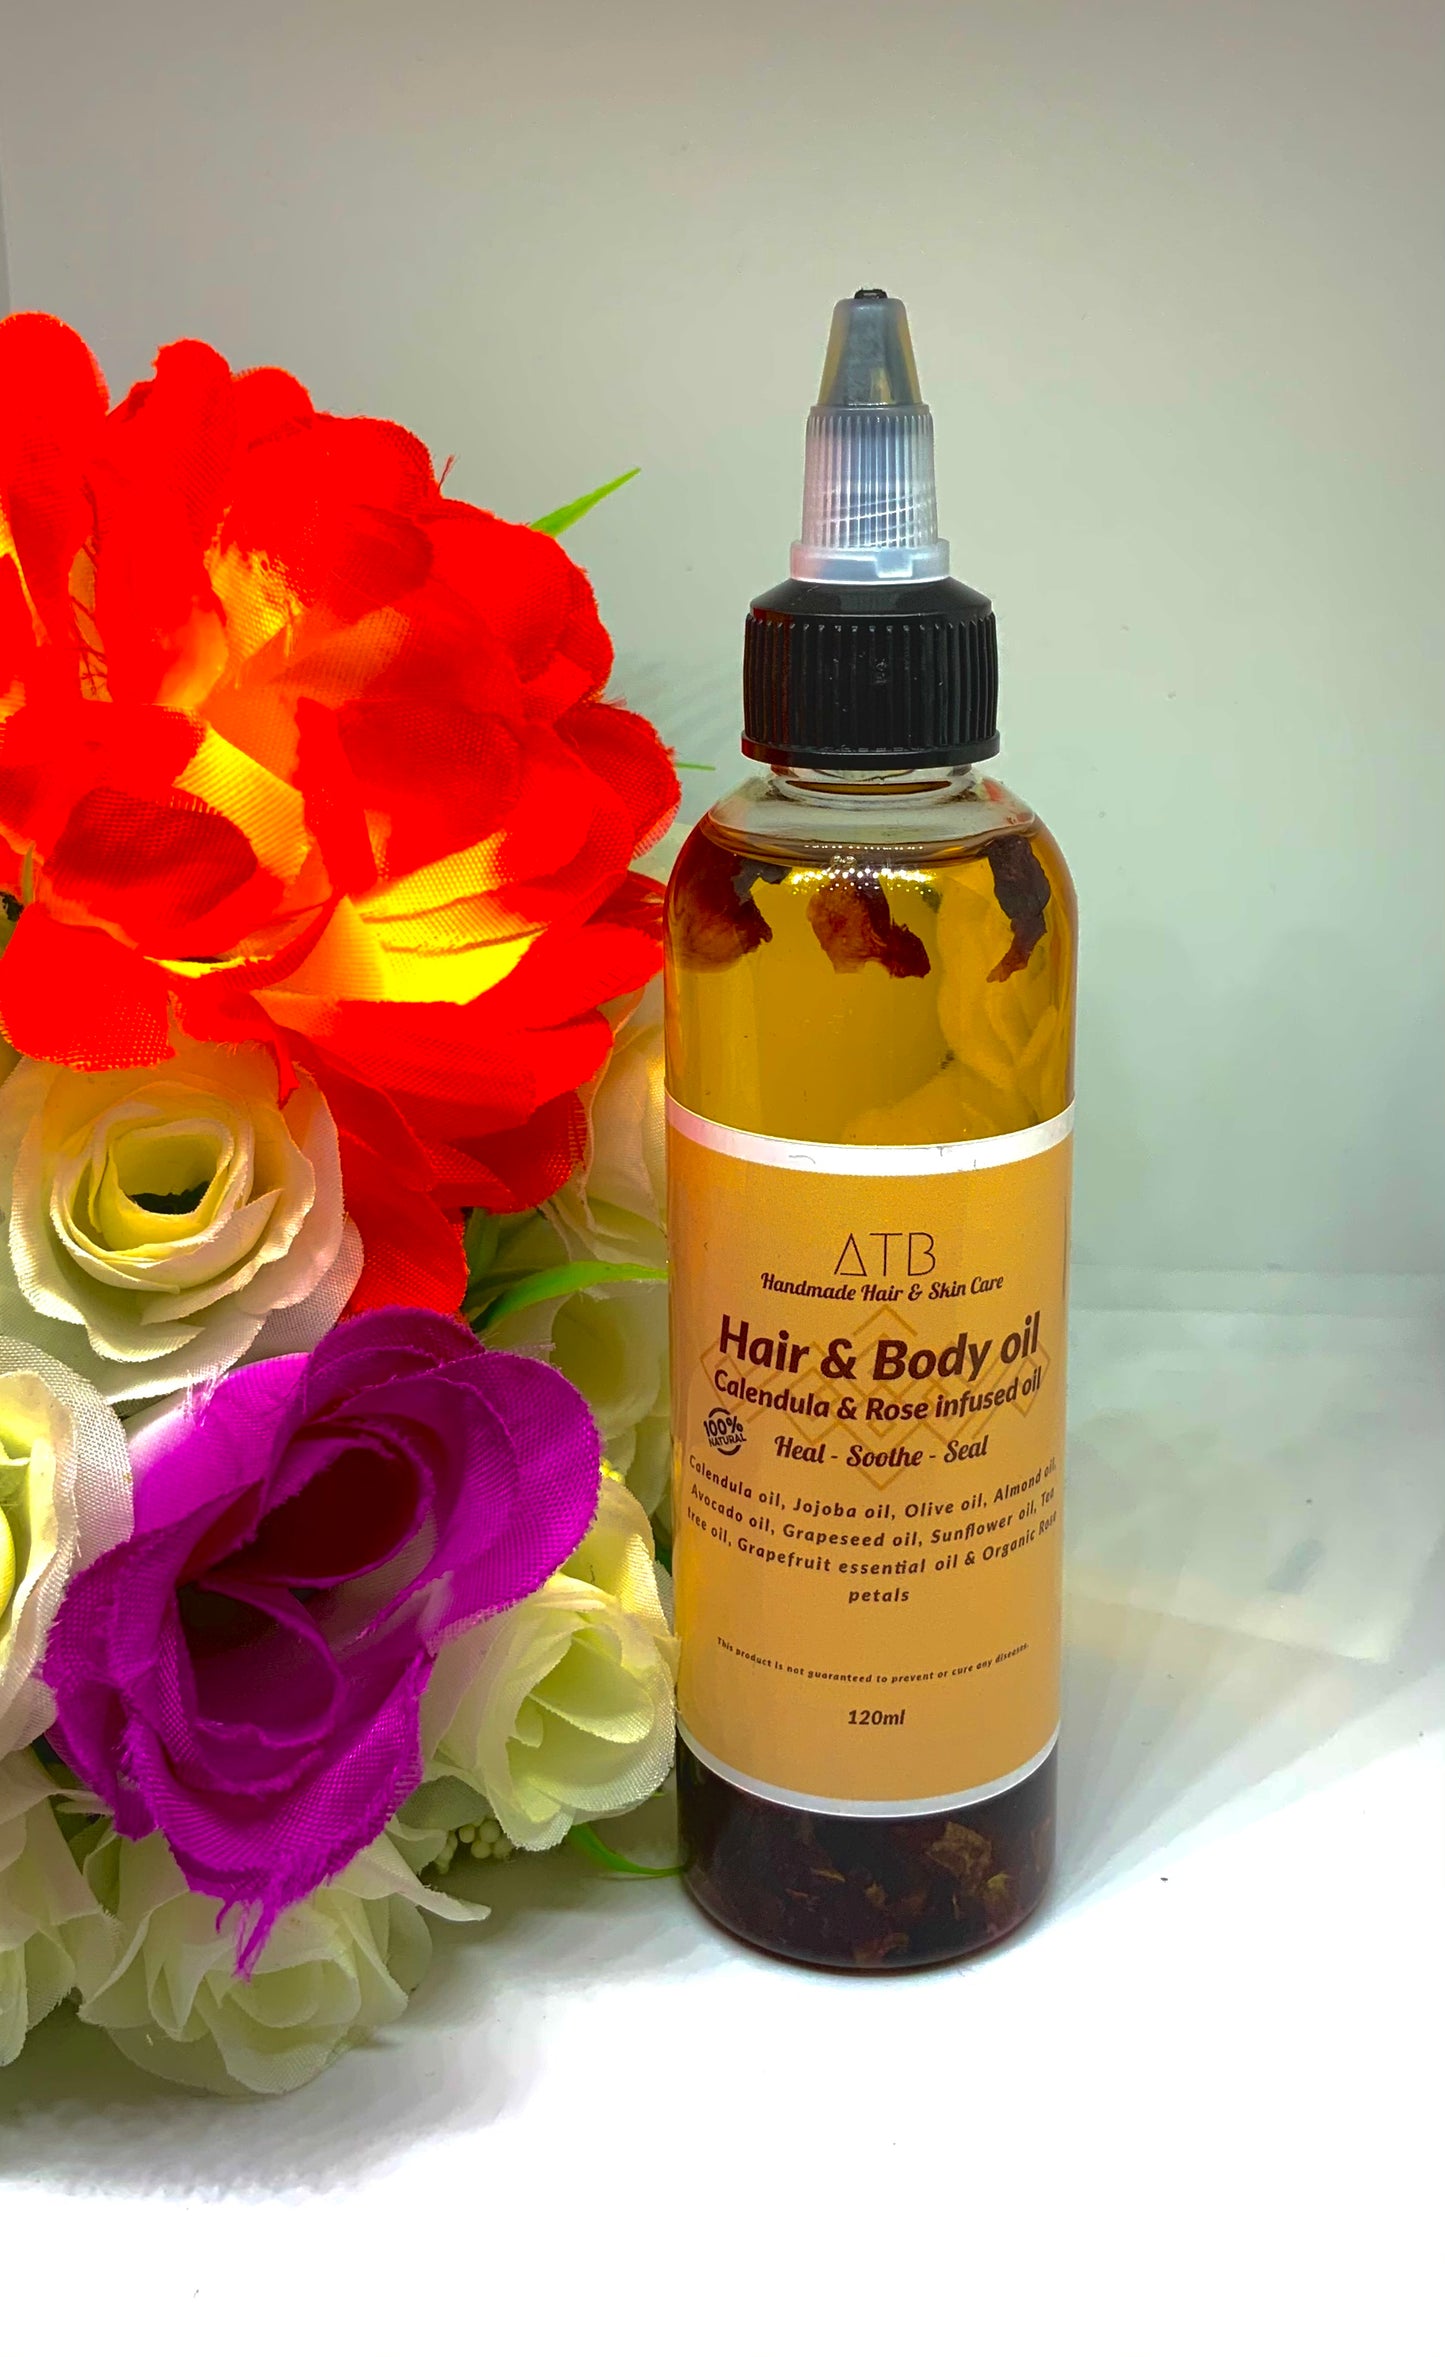 ATB Calendula and Rose petals infused oil for hair & body